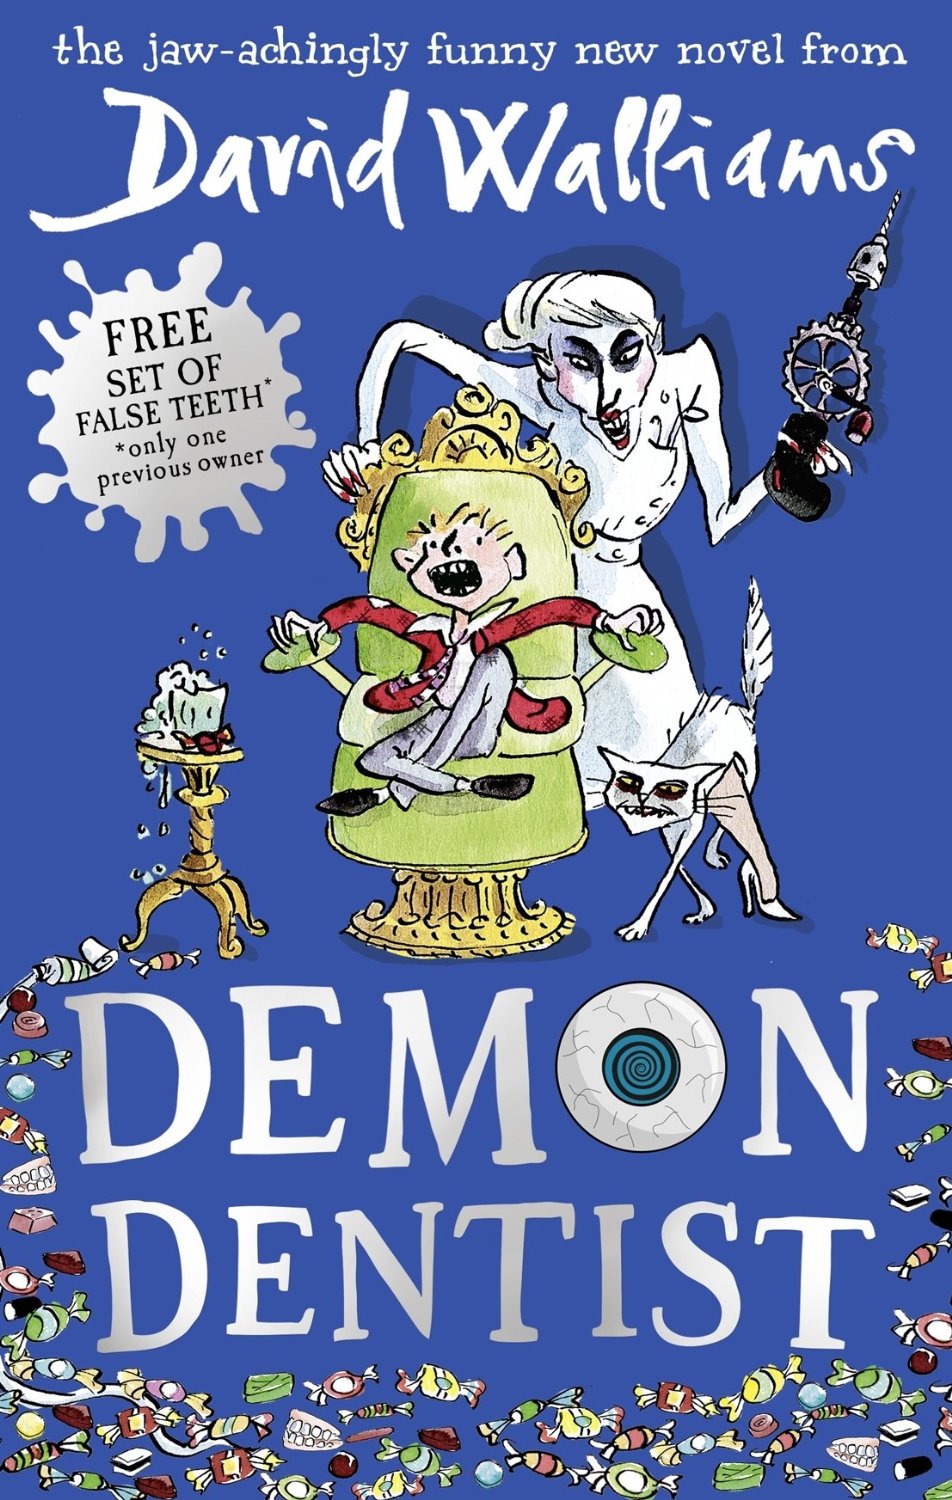 Demon Dentist breaks fastest selling kids books record (for the year)